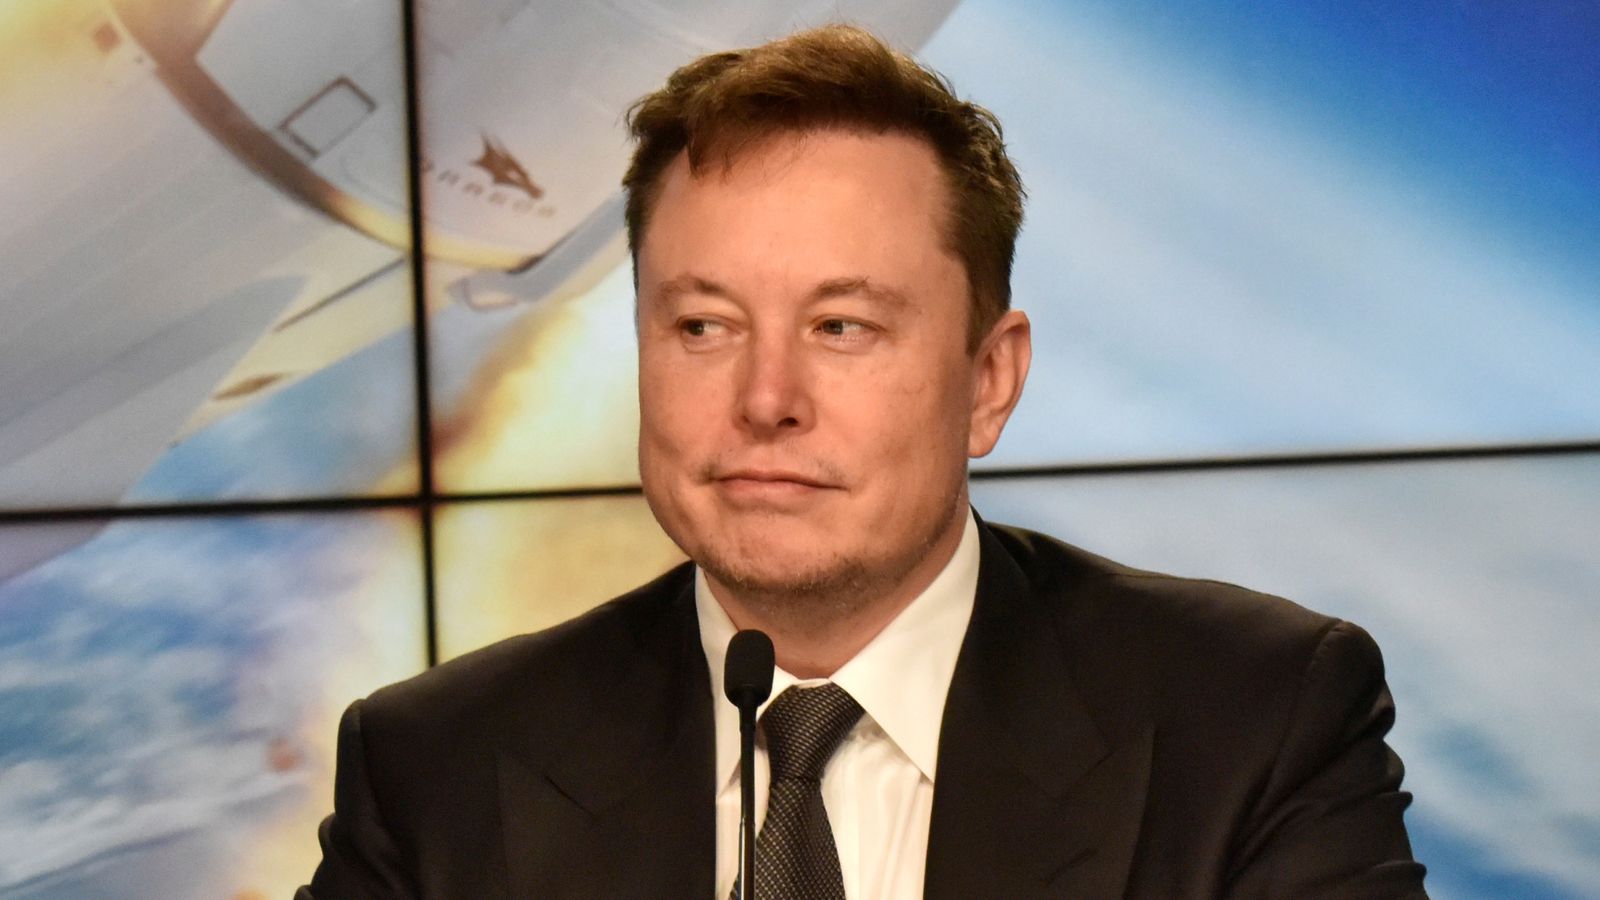 Wealthiest Americans including Elon Musk and Jeff Bezos 'paid no income tax'